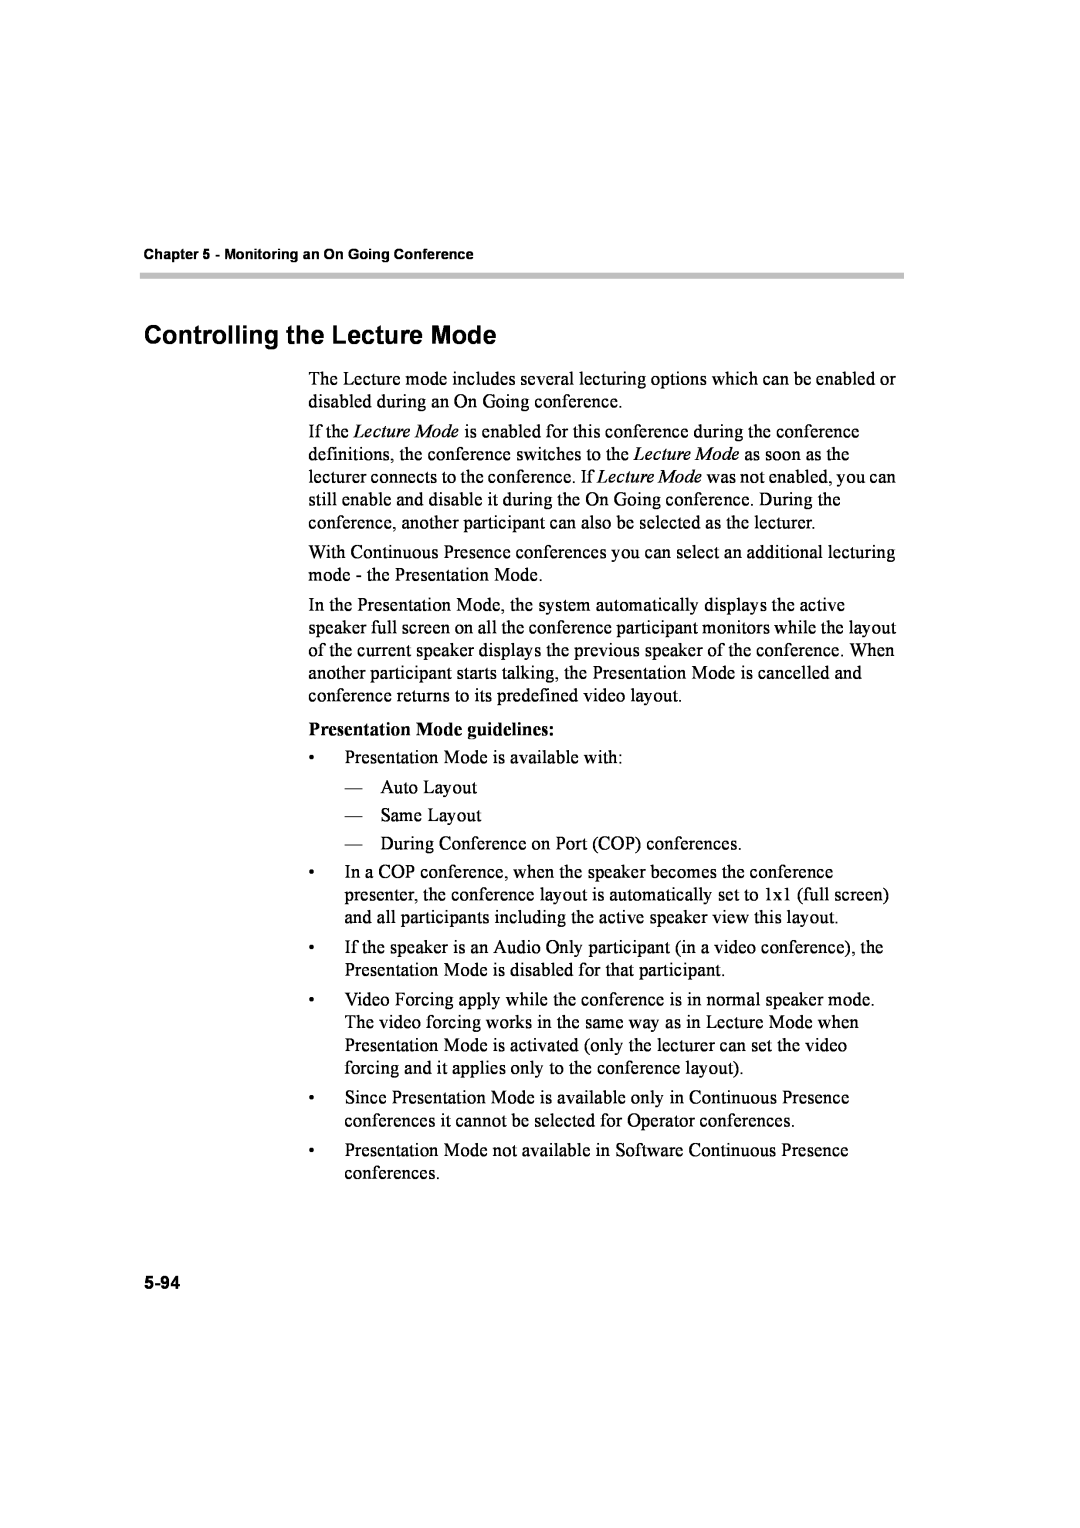 Polycom 8 manual Controlling the Lecture Mode, Presentation Mode guidelines 